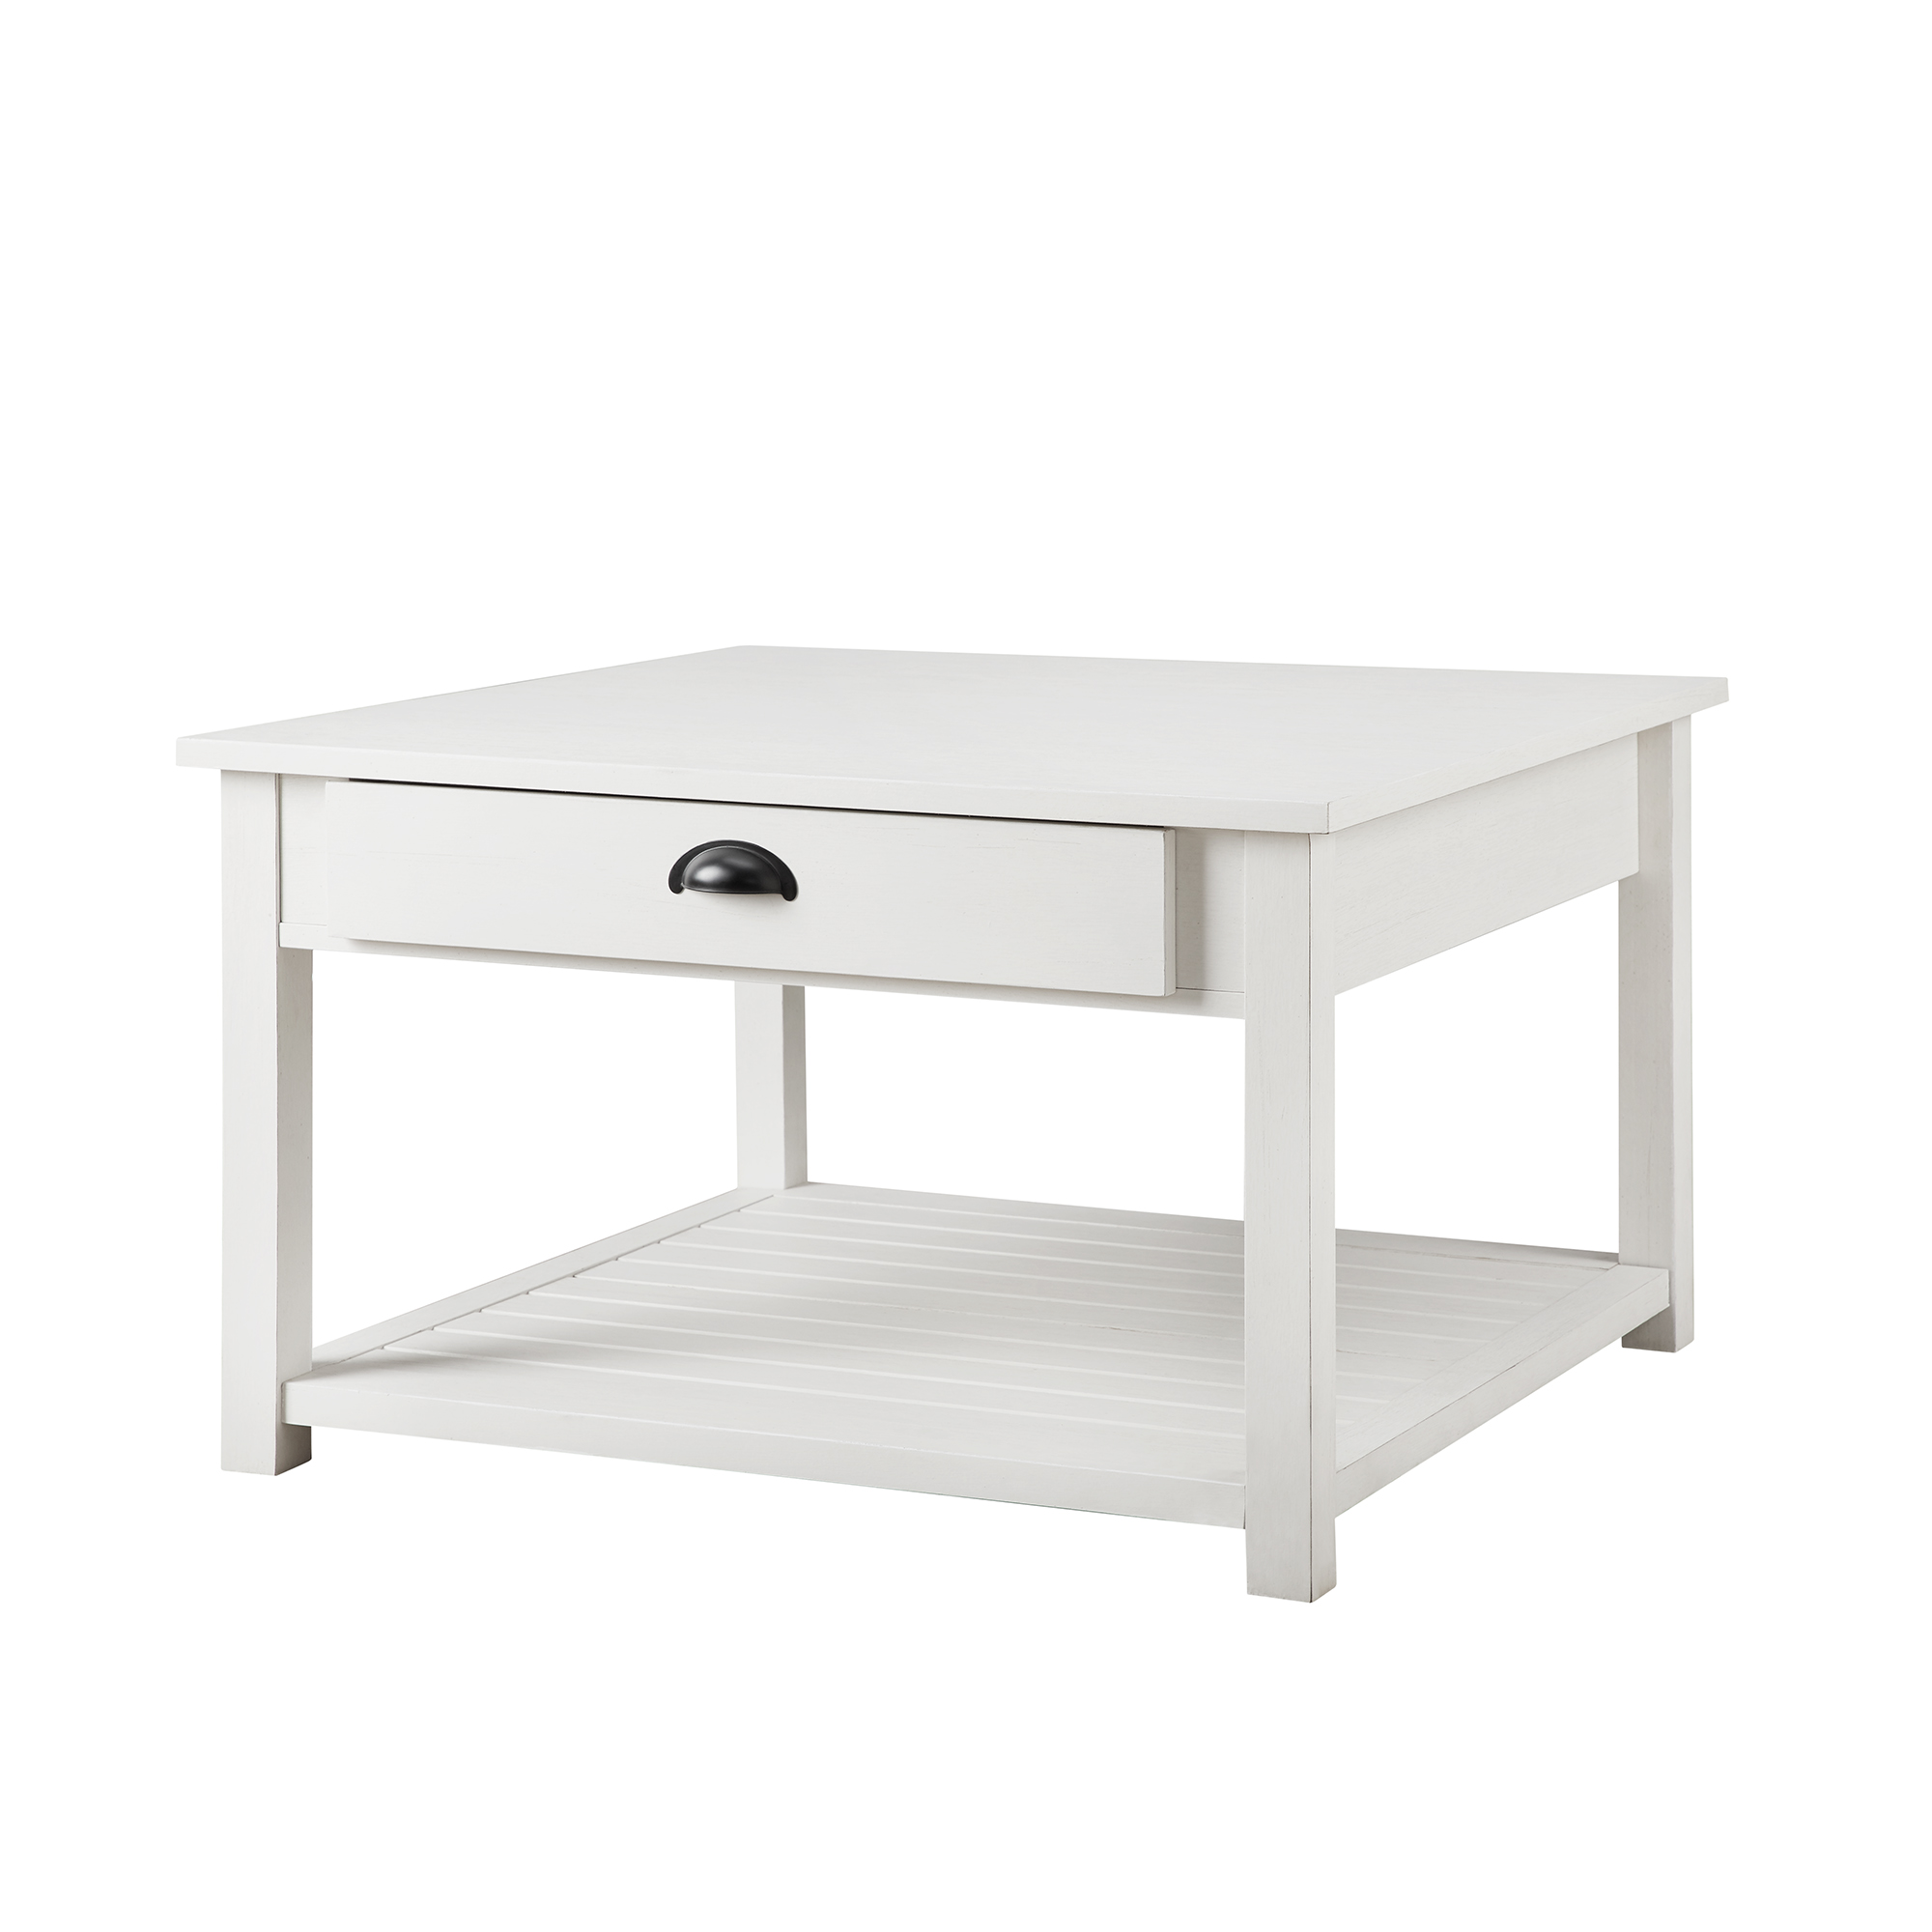 Manor Park 30 inch Square Country Coffee Table, Brushed White - image 5 of 10